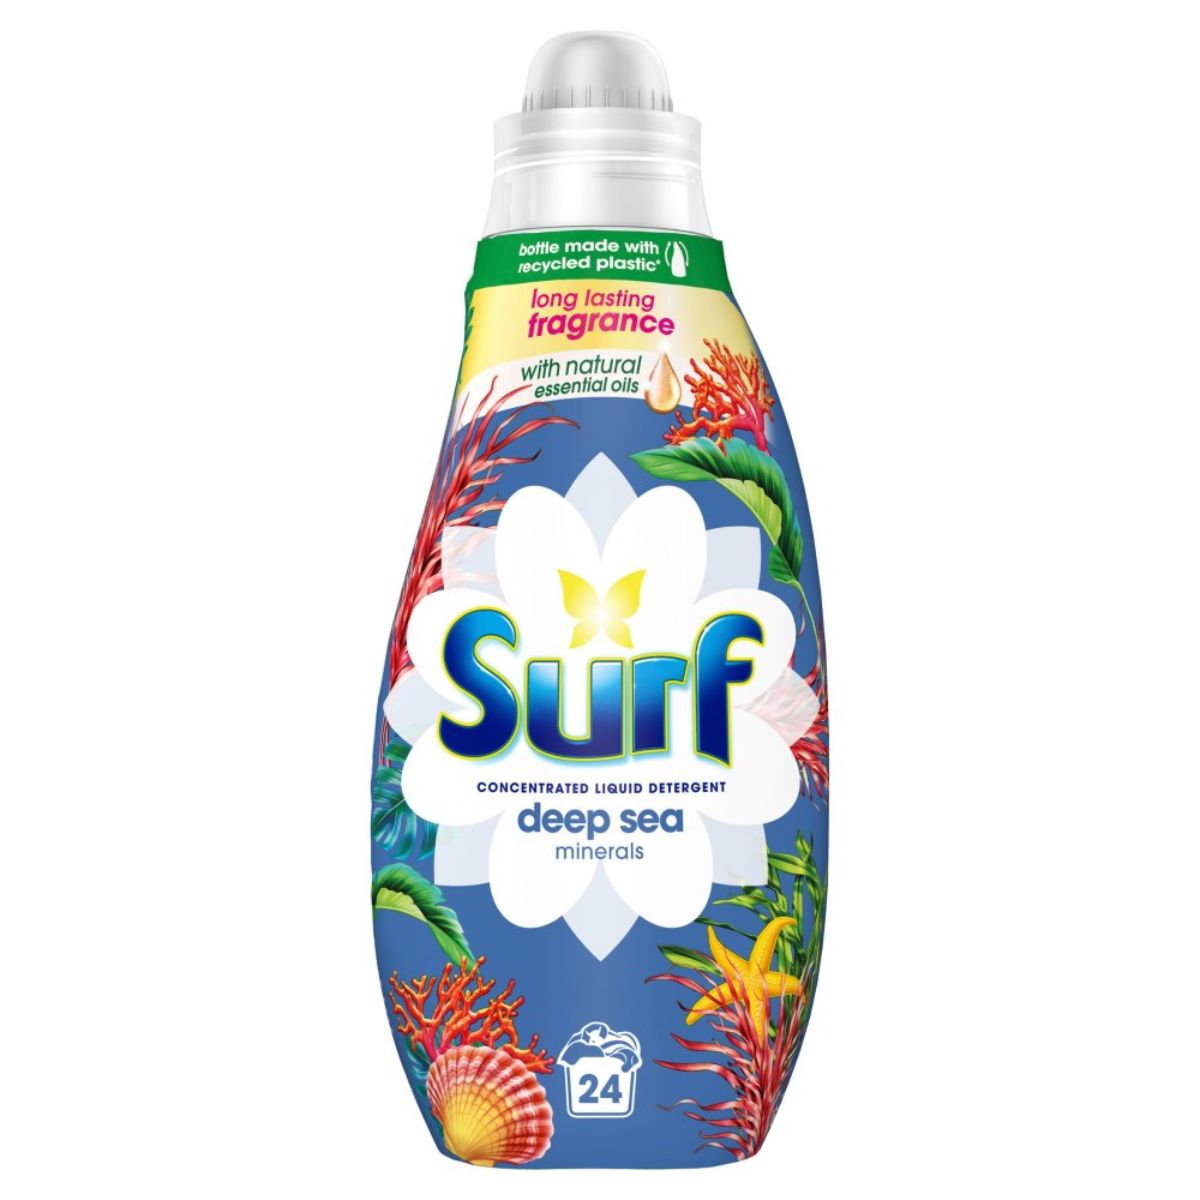 A bottle of Surf - Concentrated Liquid Laundry Detergent Deep Sea Minerals - 24 washes on a white background.